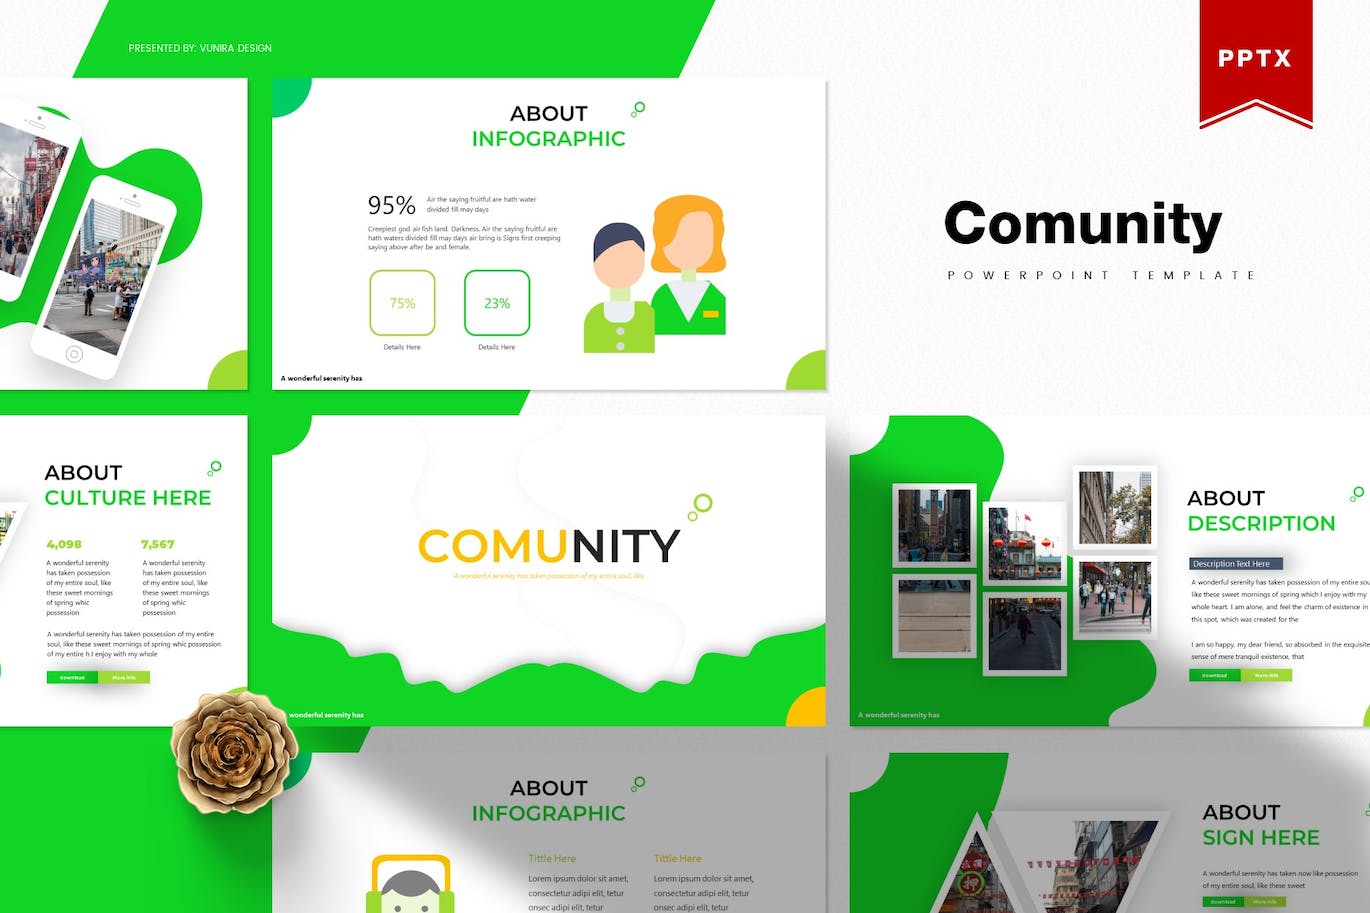 A set of images of unique slides presentation template on the topic of the community.